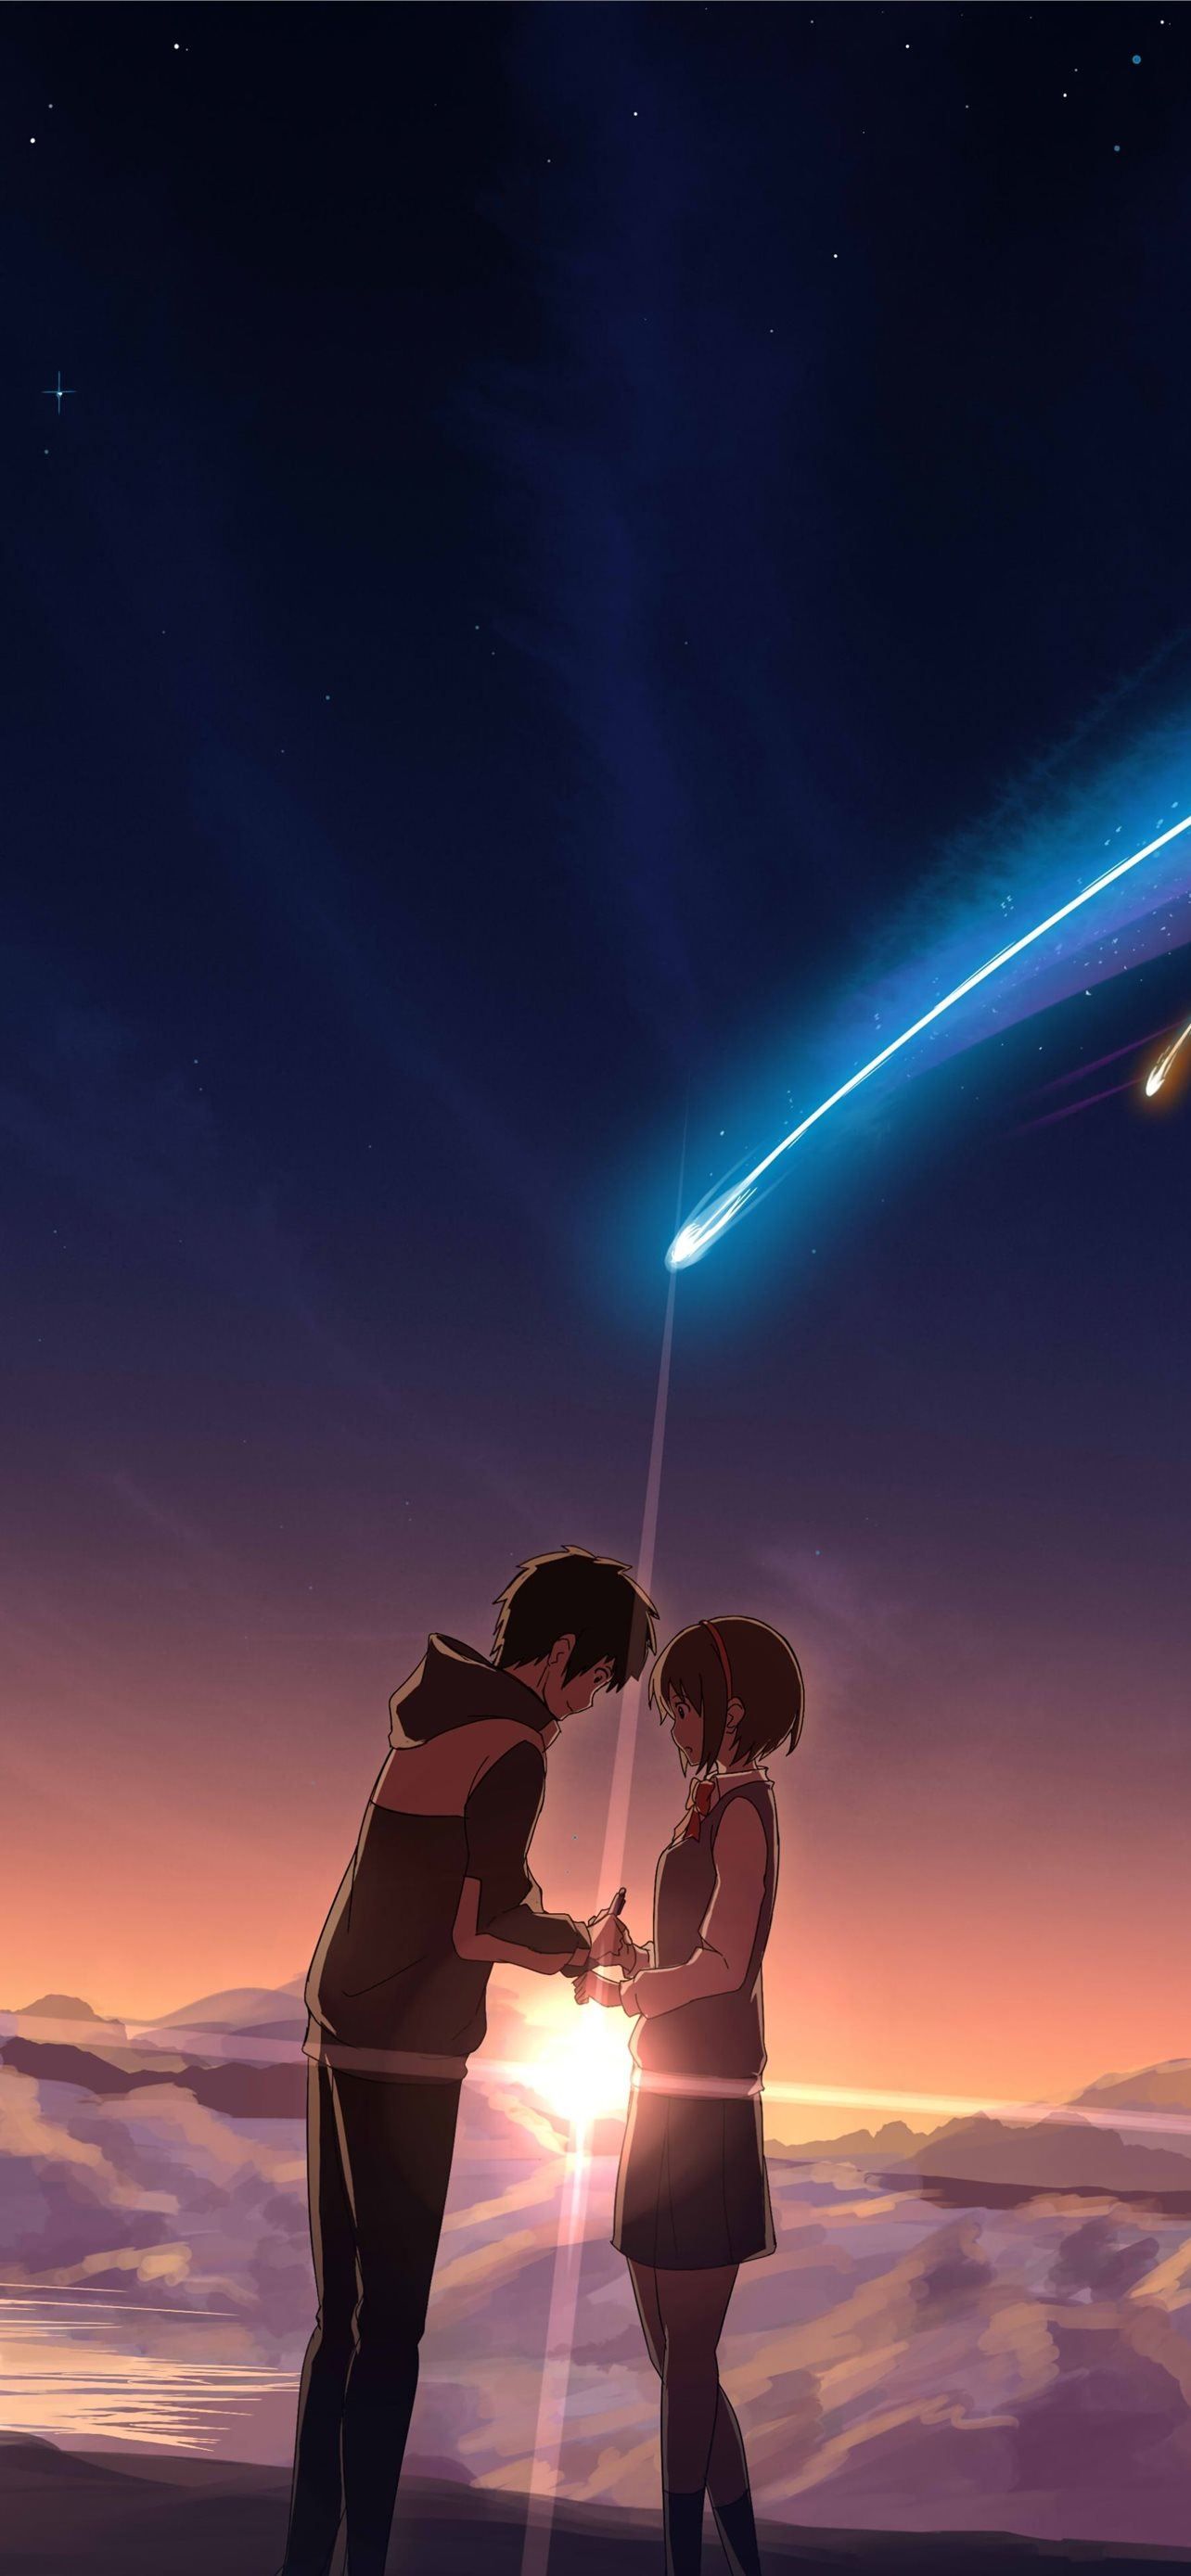 Anime couple holding hands under a shooting star - April